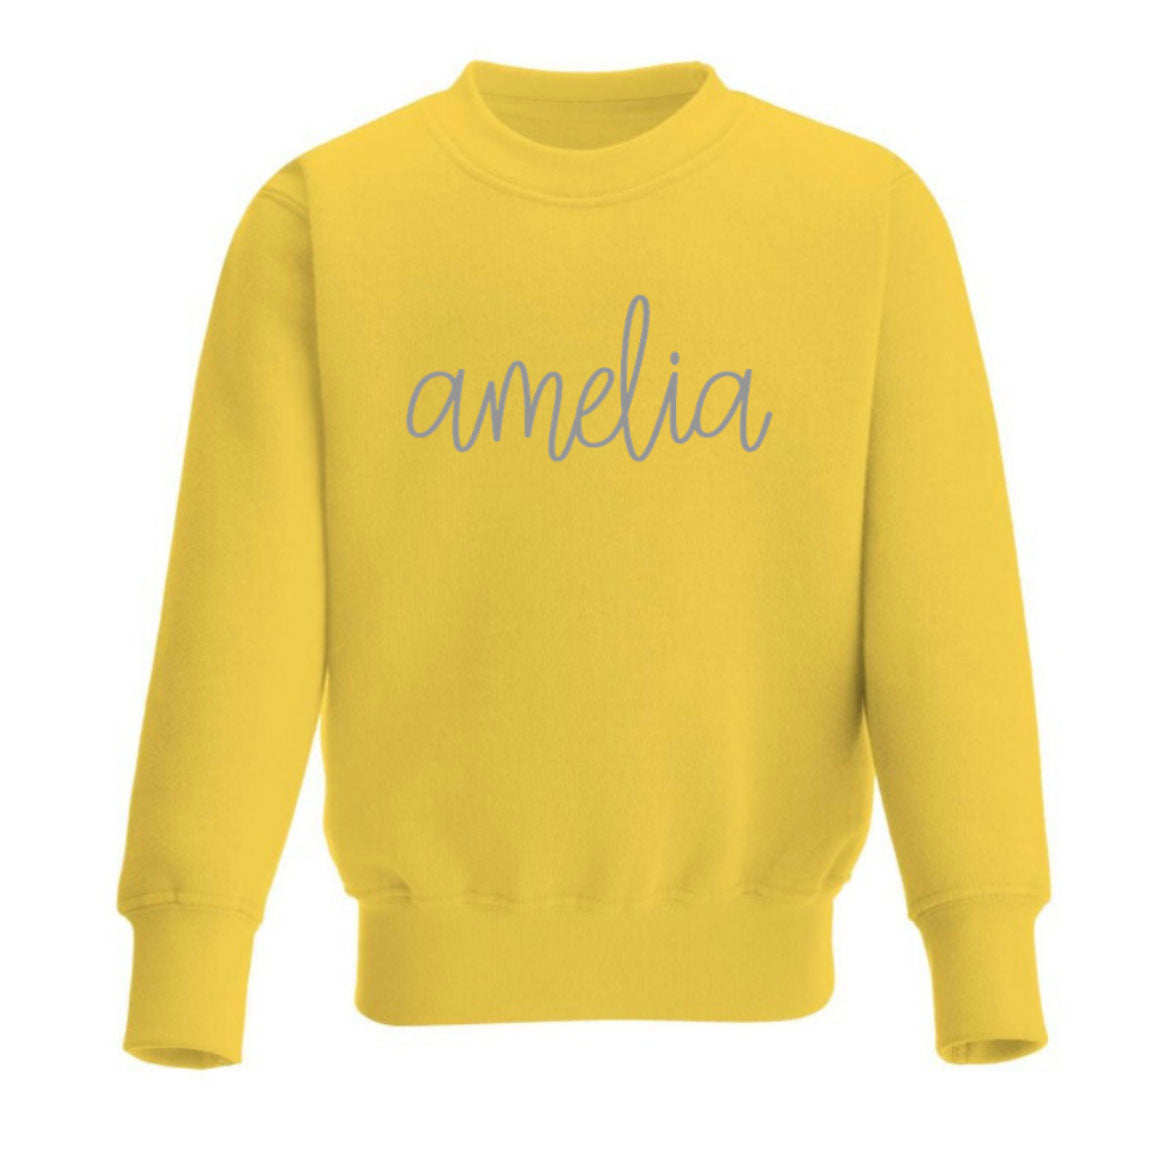 Create Your Own Yellow Sweater